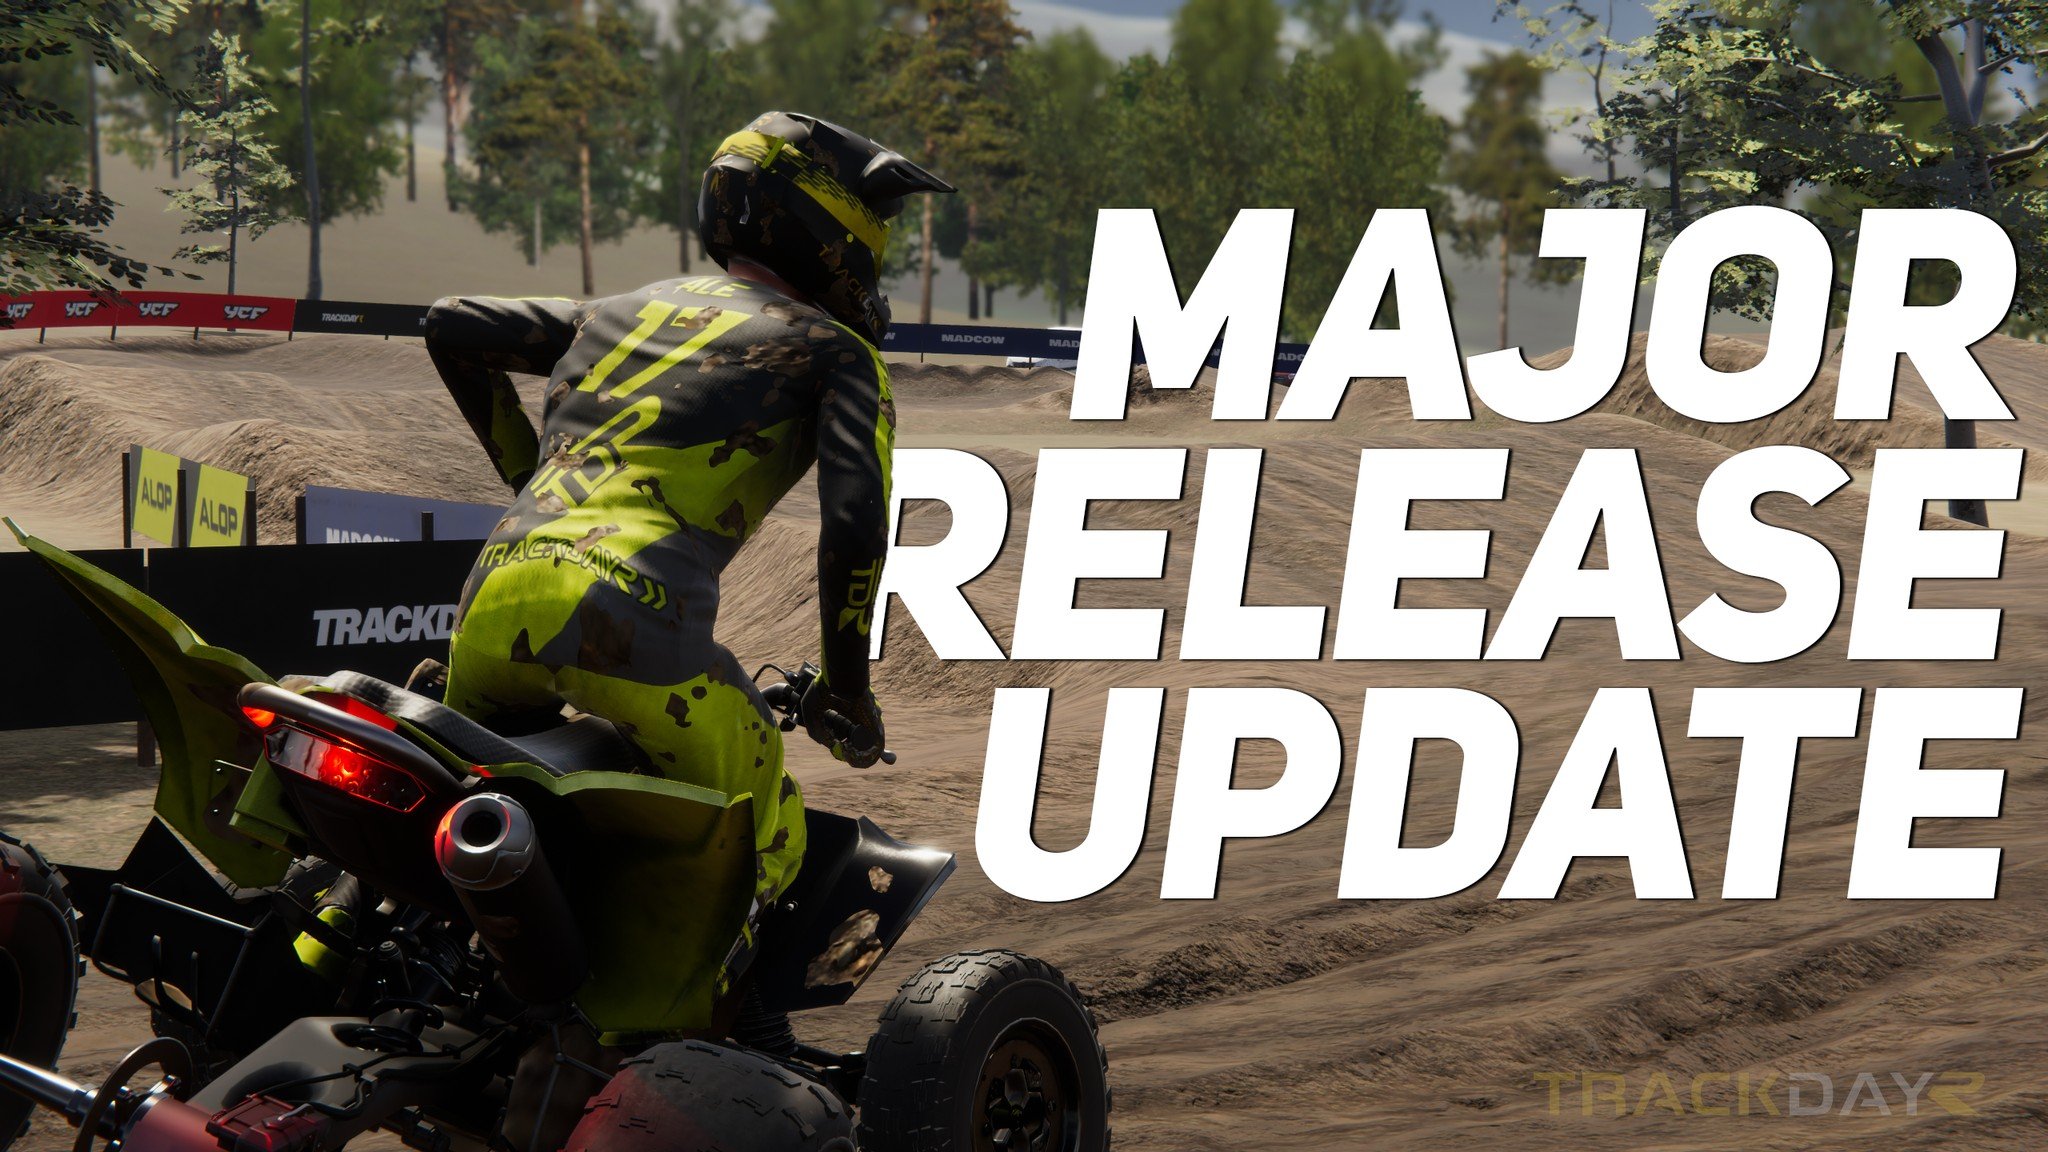 More information about "Nuovo importante update disponibile per TrackDayR"